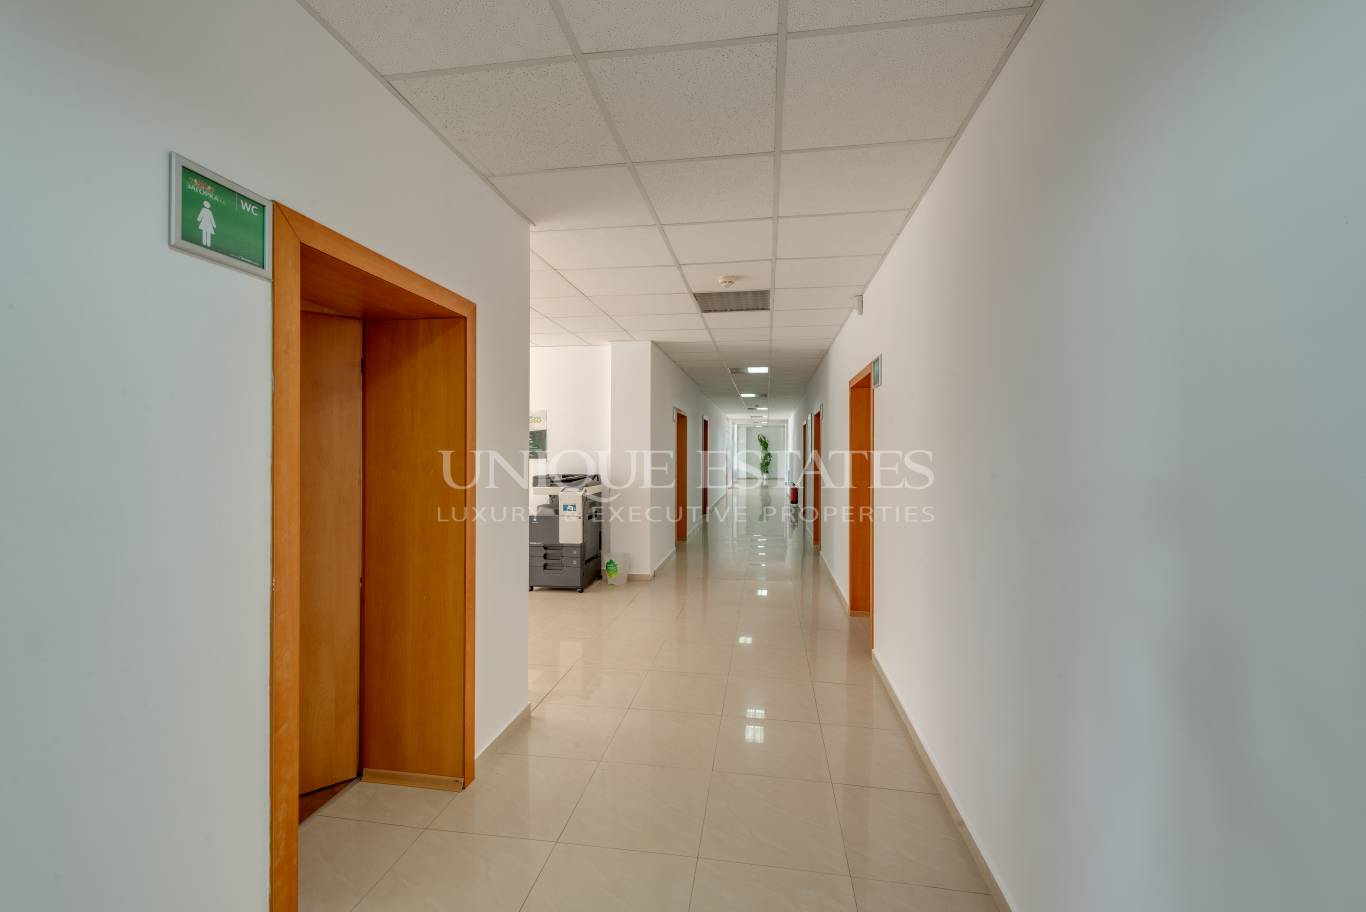 Office Building / Building for sale in Sofia, Mladost with listing ID: K10134 - image 3